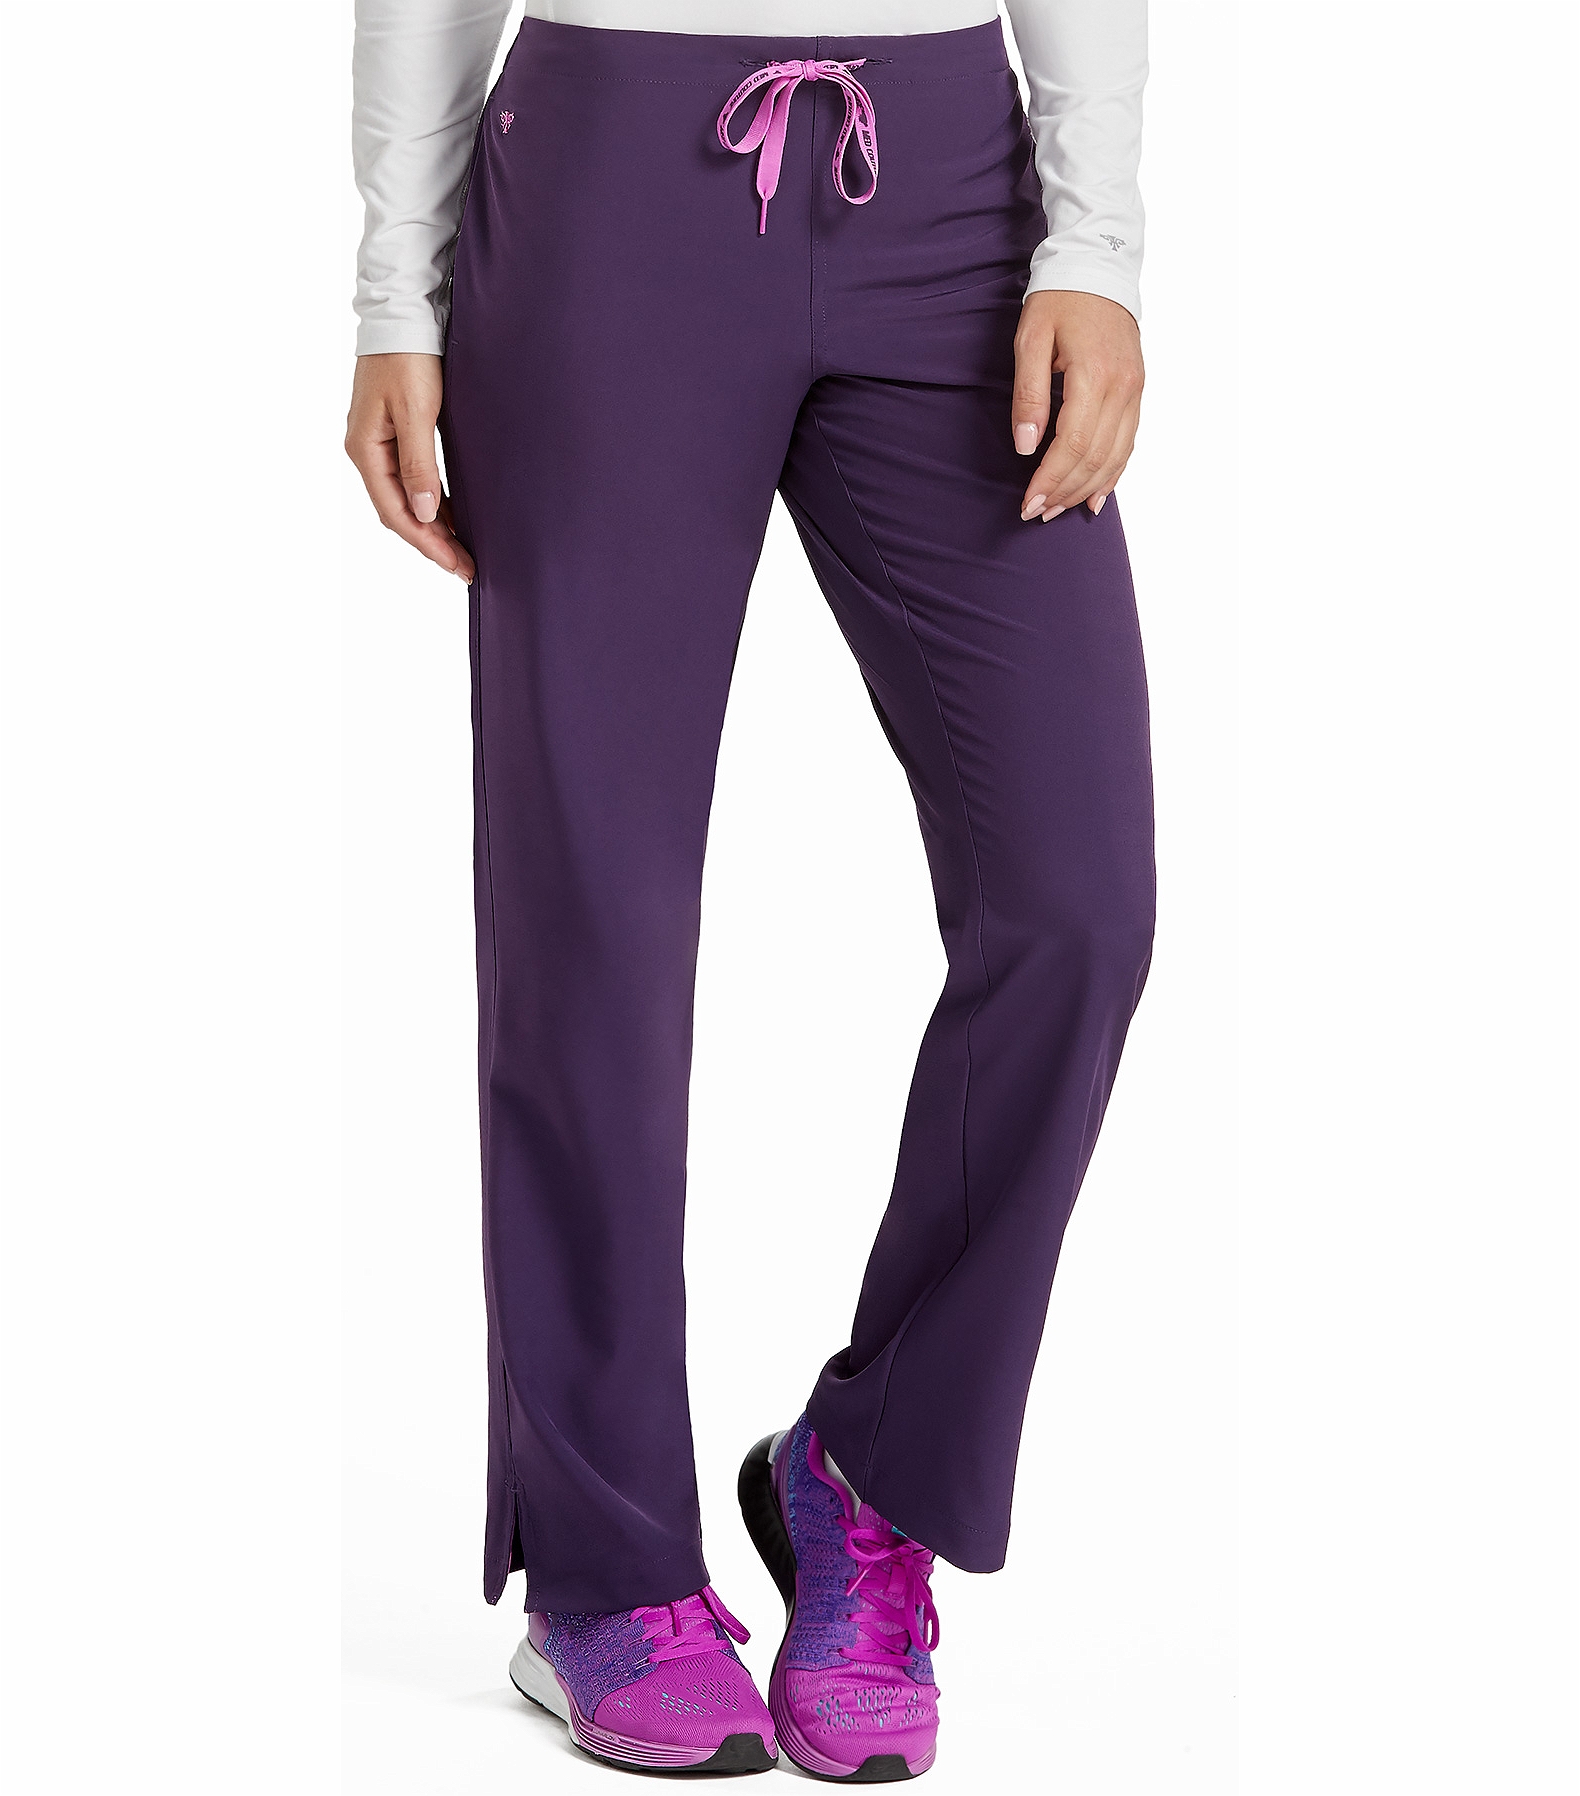 Med Couture Energy Women's Classic 3-Pocket Grace Pant-8718 | Medical ...